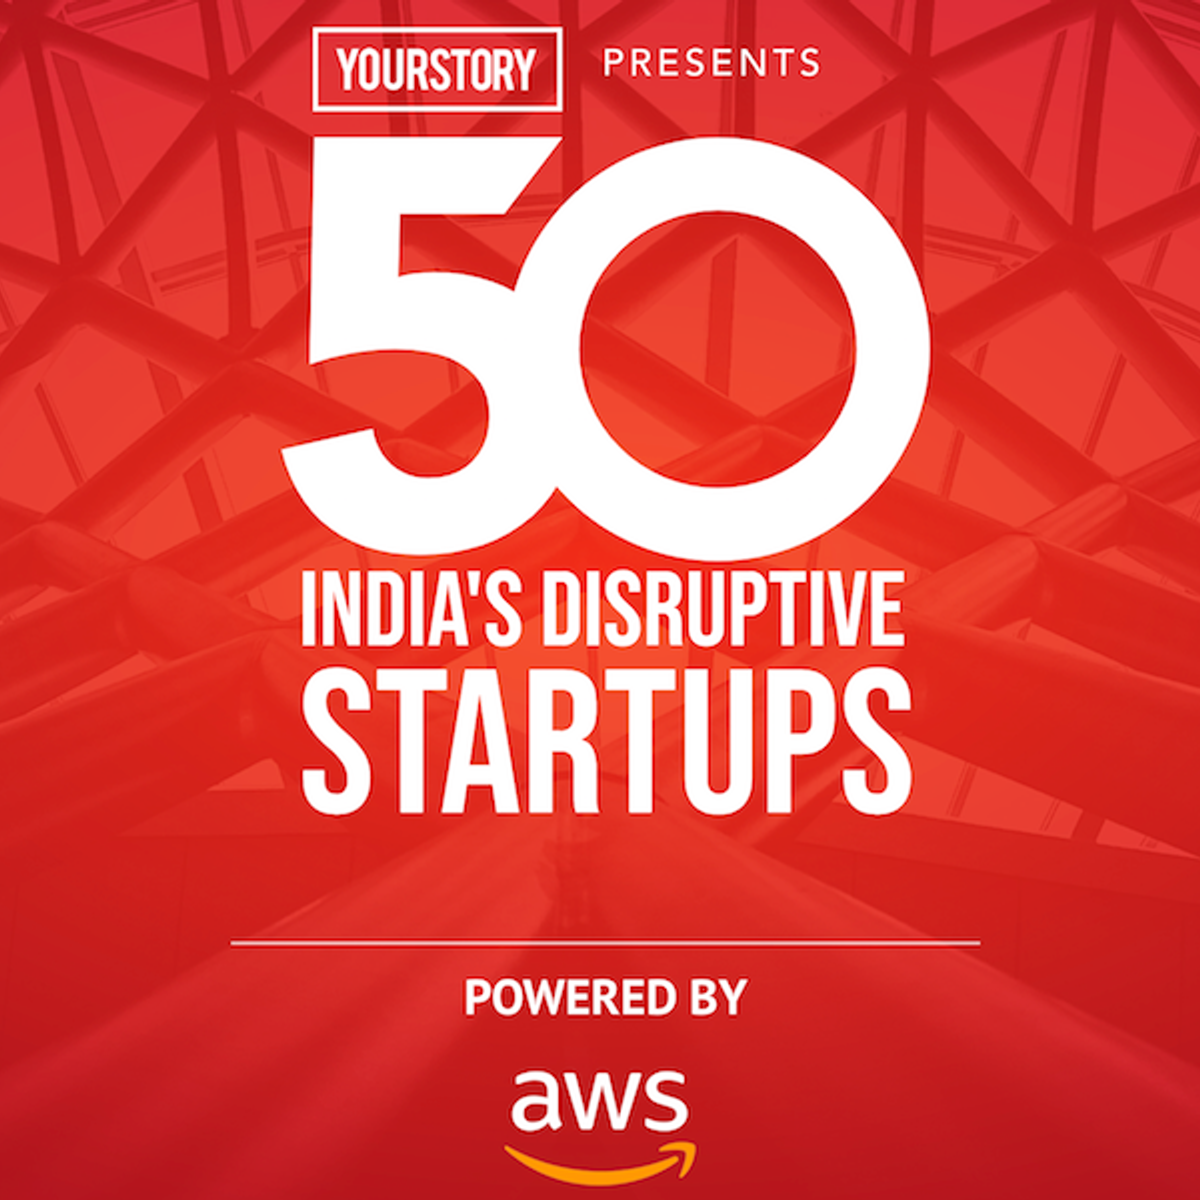 YourStory's Top 50 Disruptive Startups: Indian companies that dominated the news in 2019